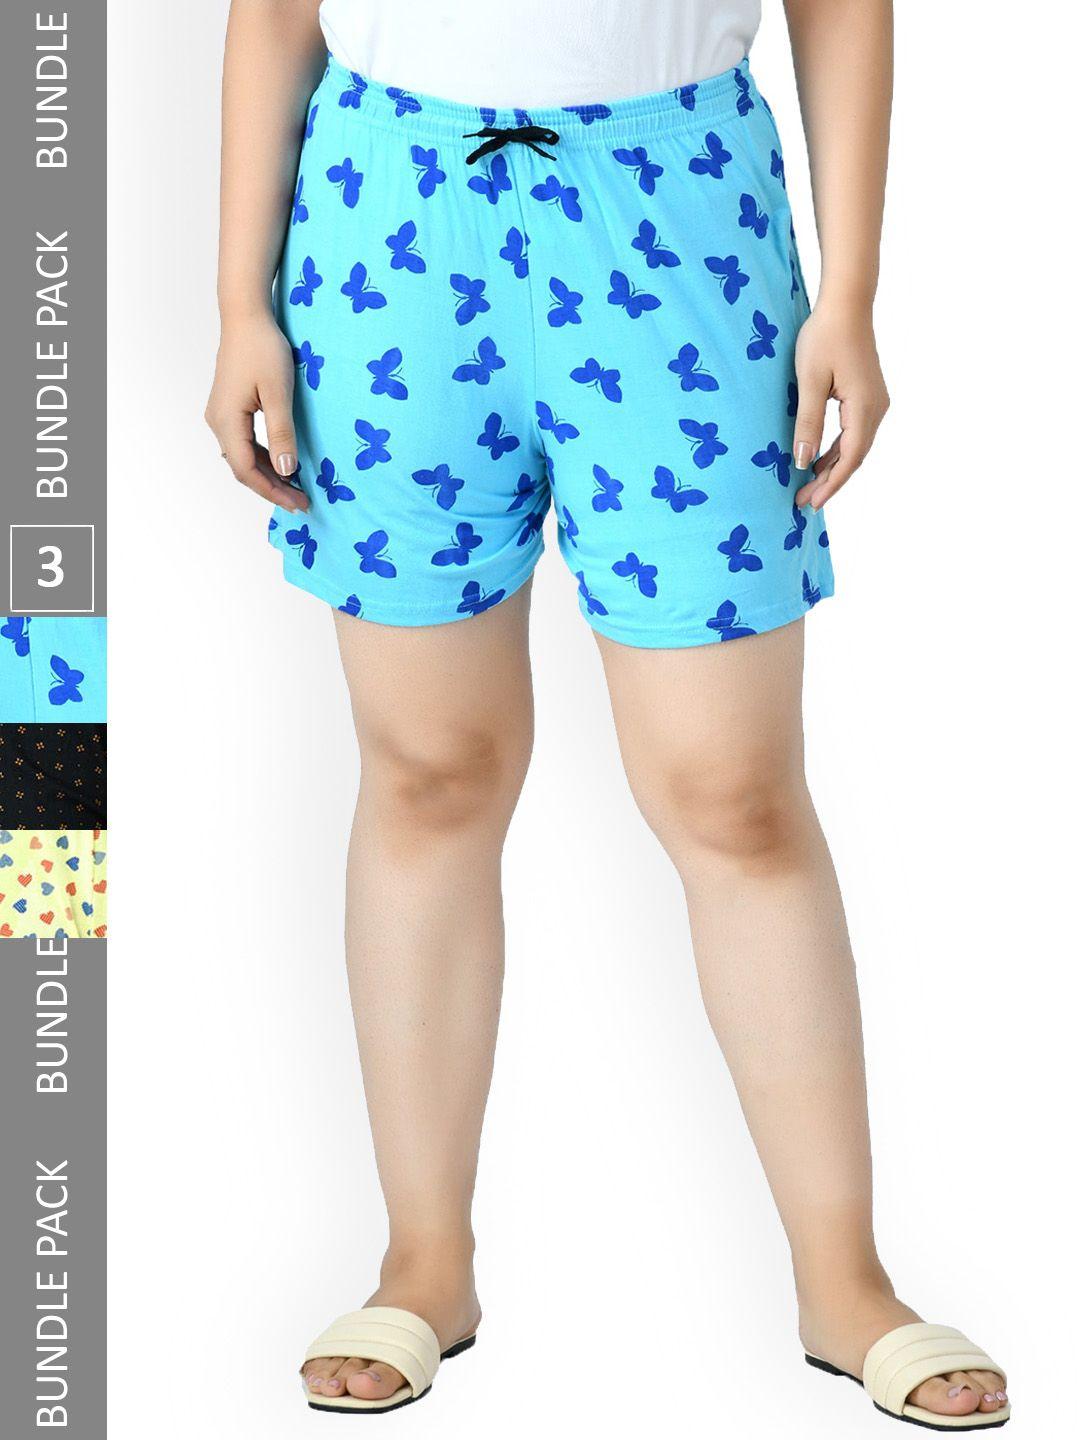 indiweaves-women-pack-of-3-high-rise-printed-pure-cotton-shorts